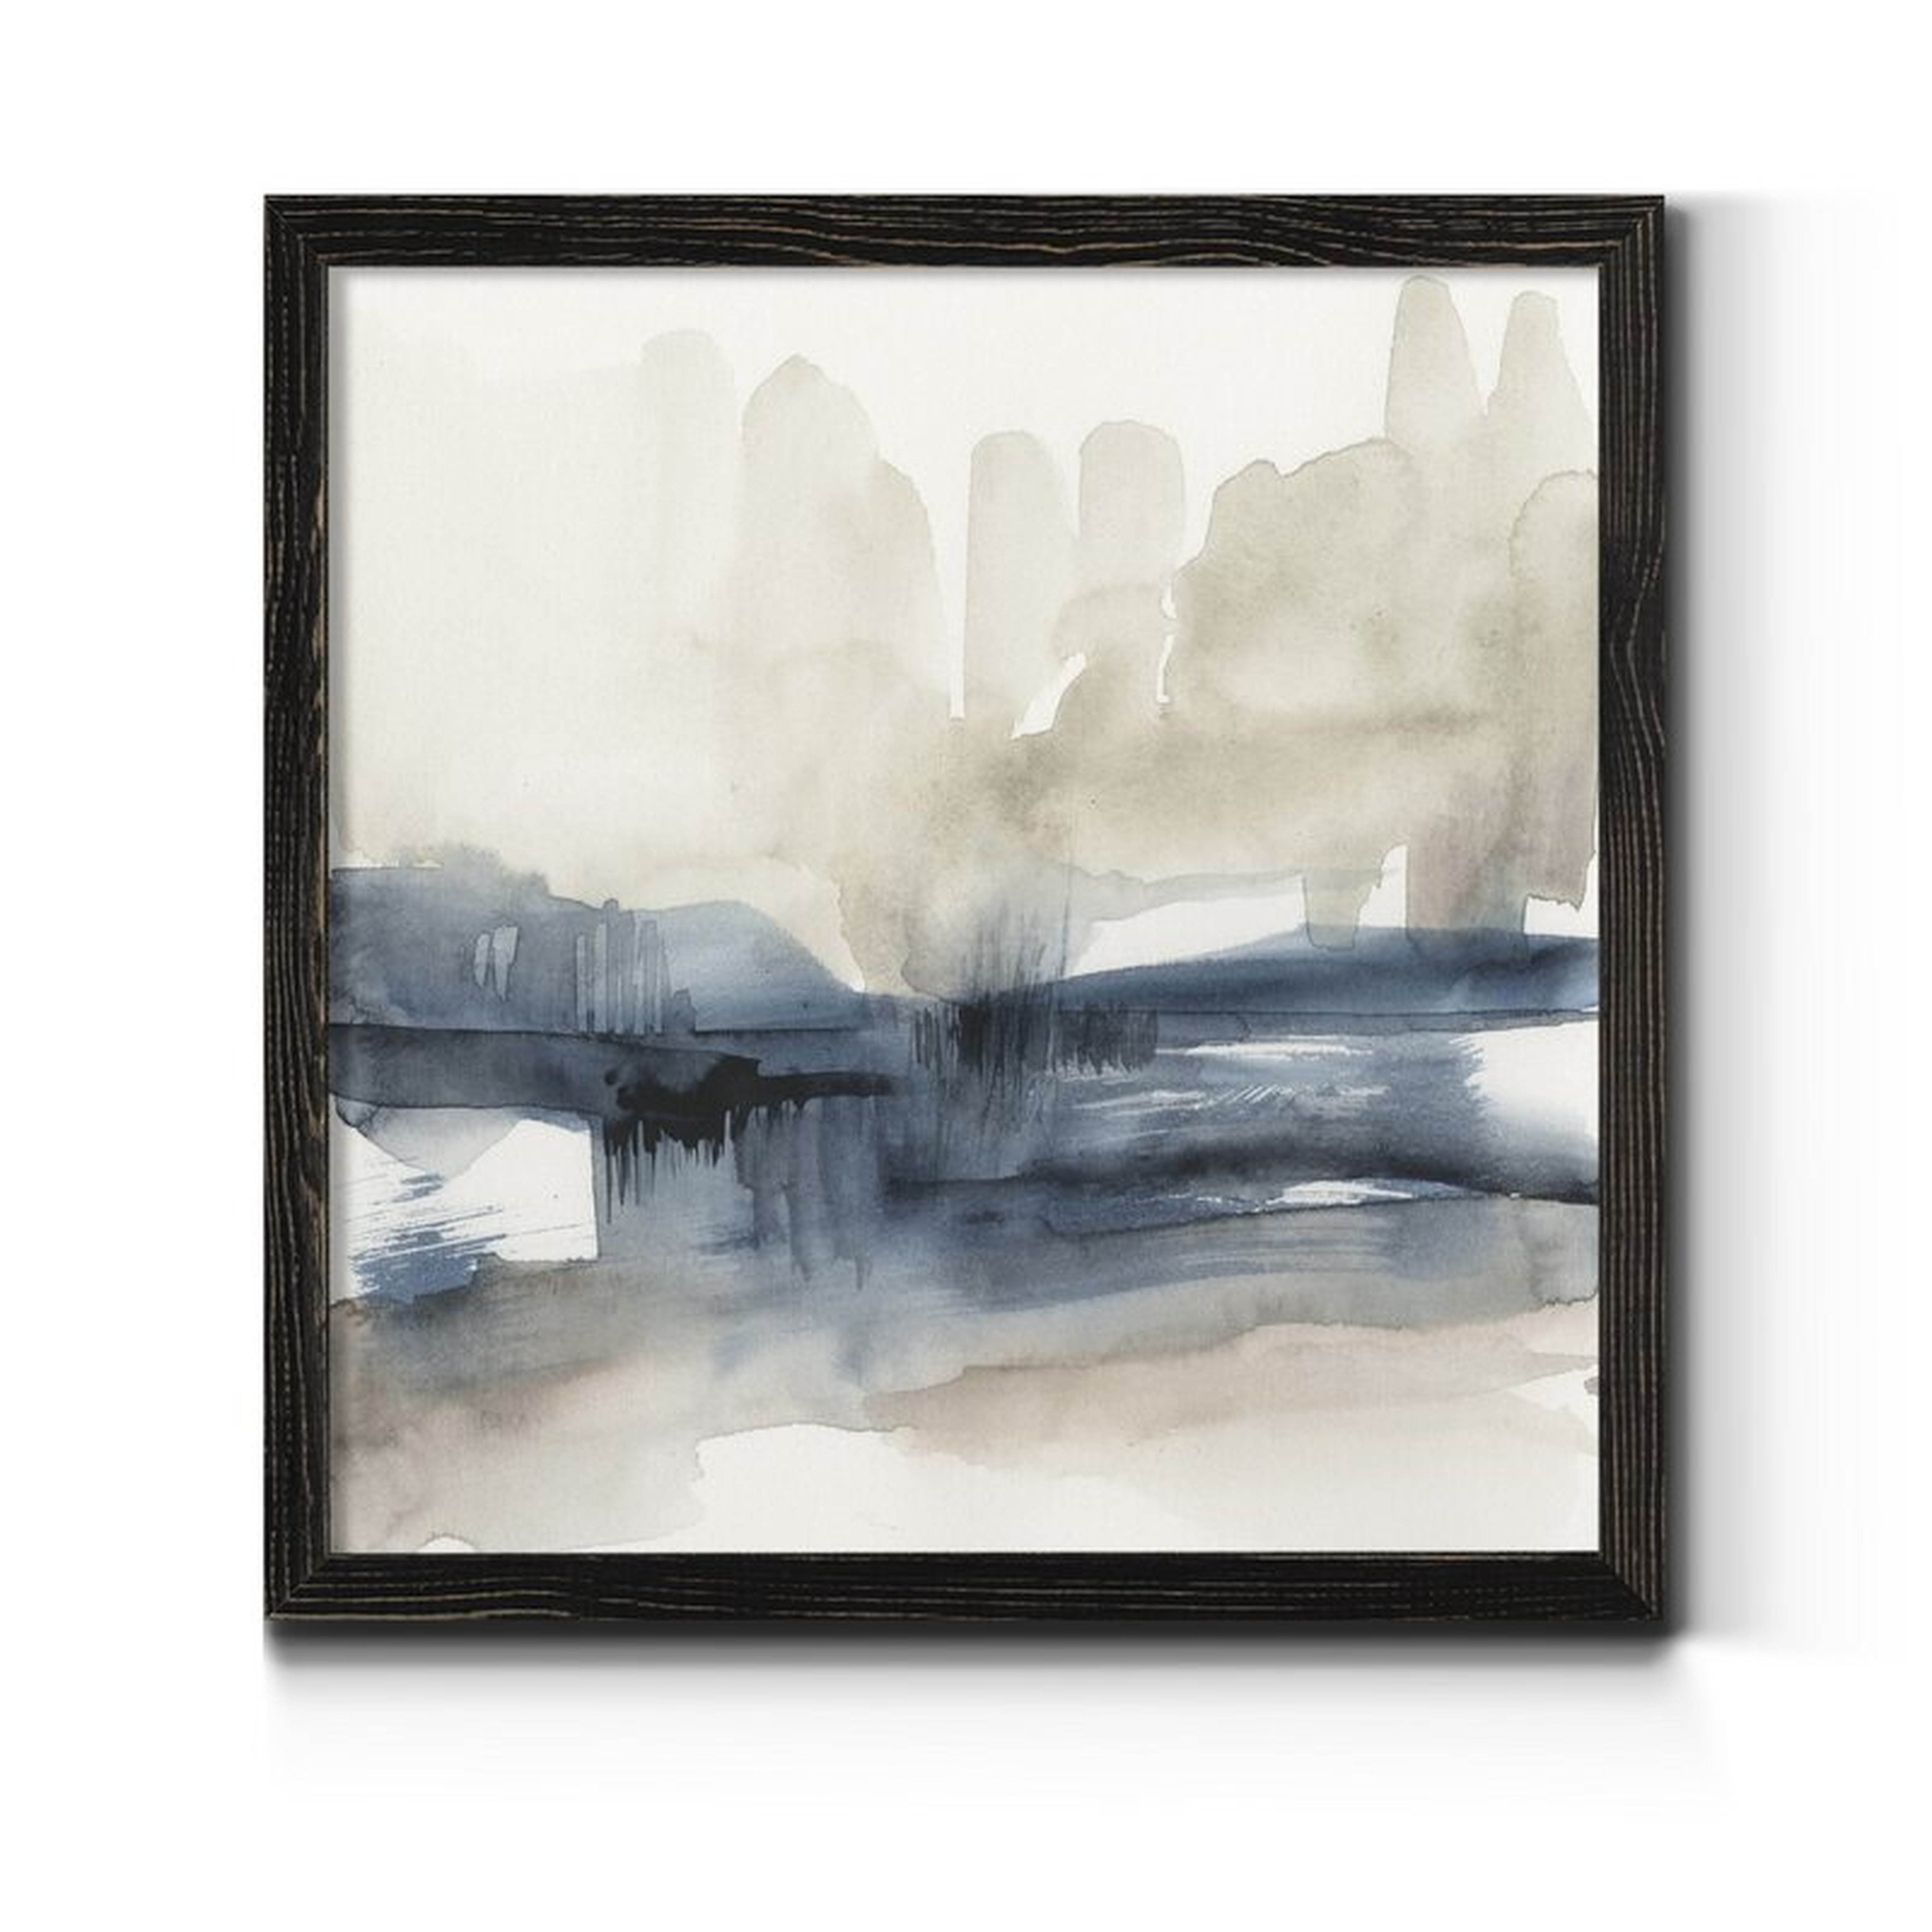 Fog on the Horizon I - Picture Frame Painting Print on Canvas - Wayfair